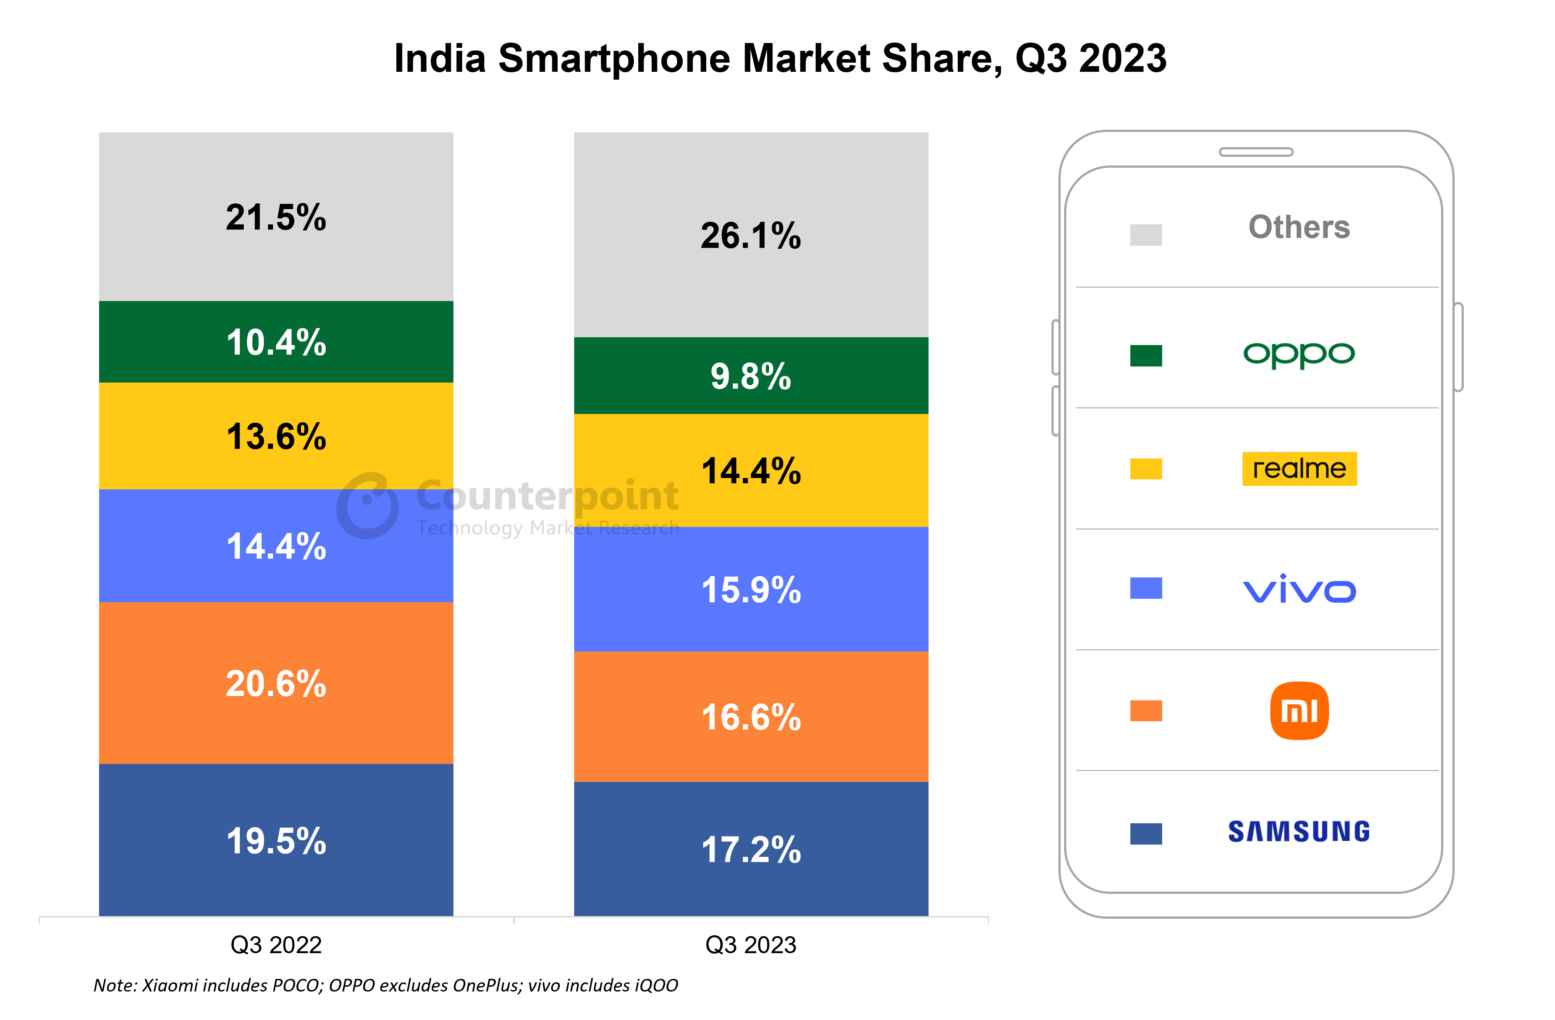 A chart representing different smartphone brands' market share in India in Q3 2023